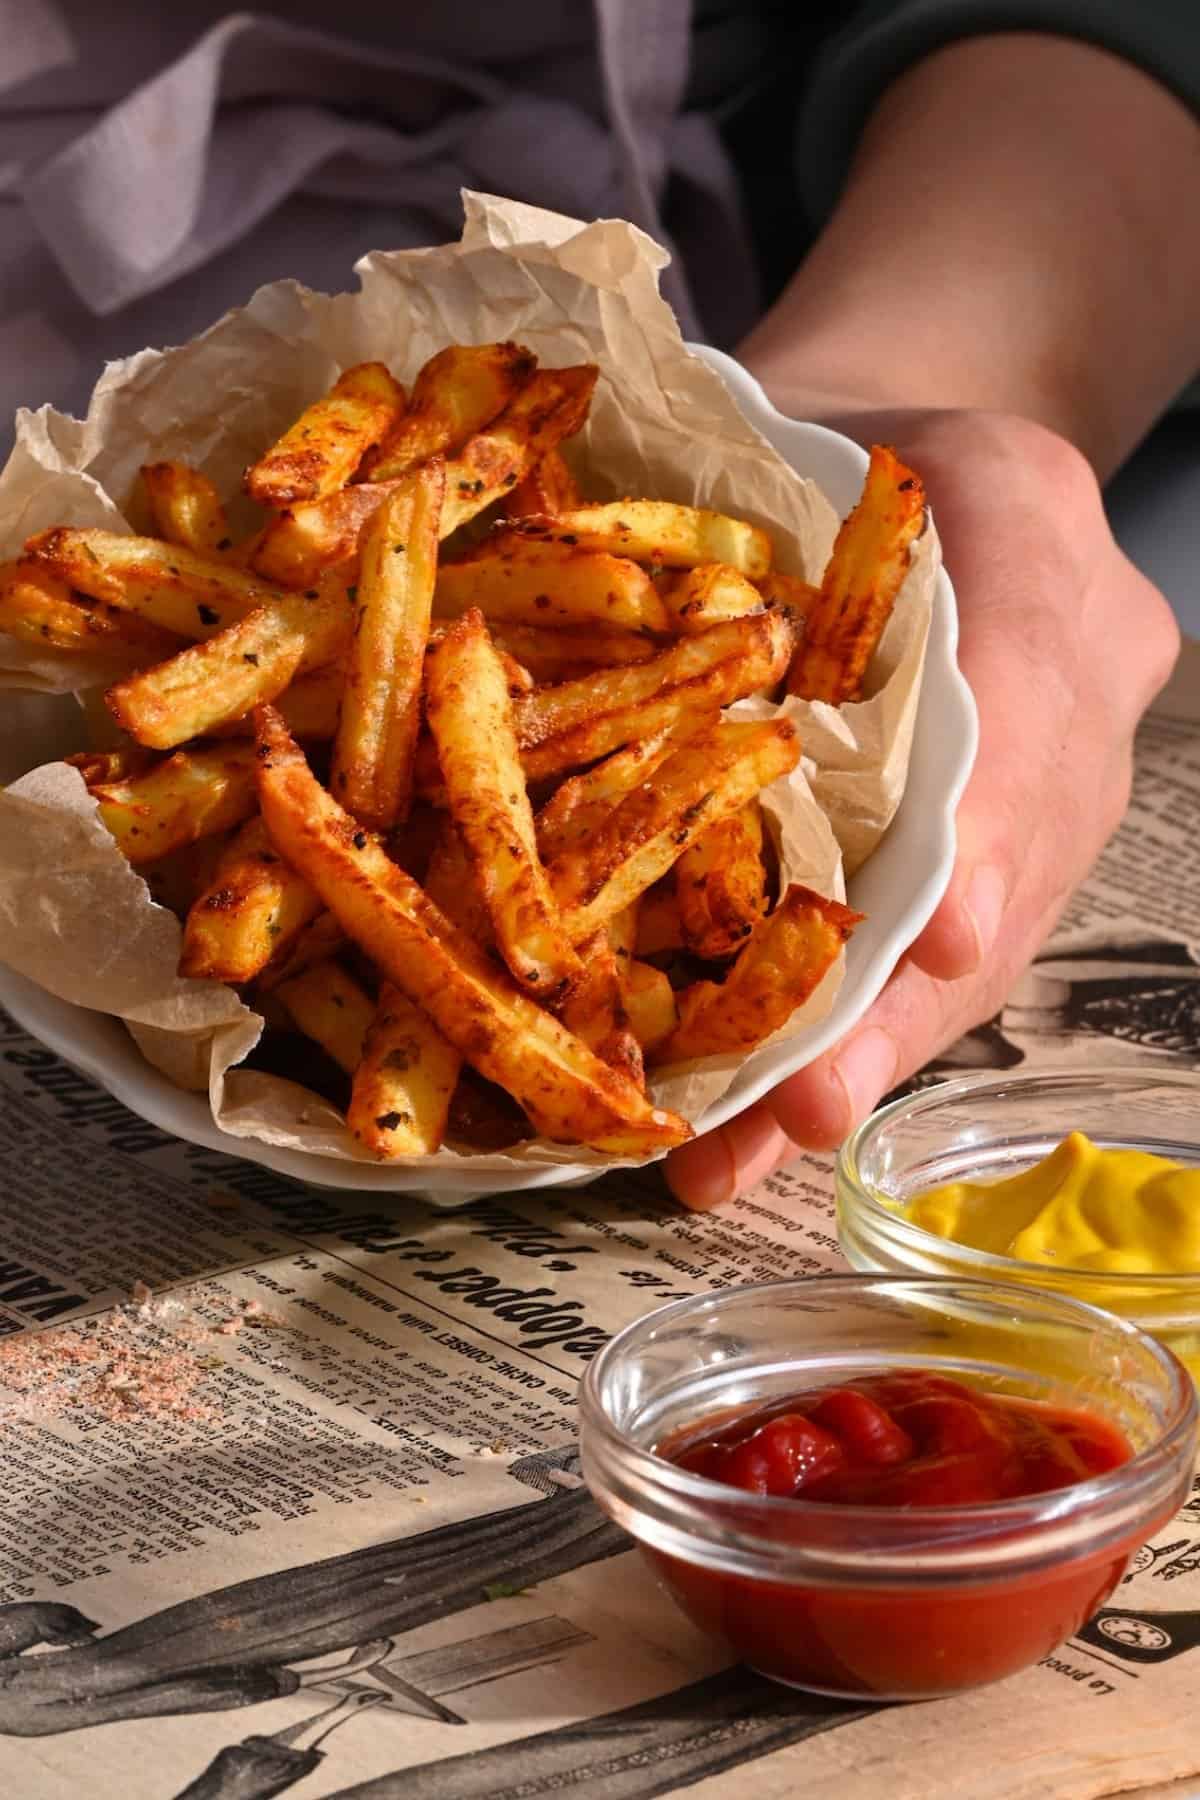 French fries with seasoning and ketchup and mustard